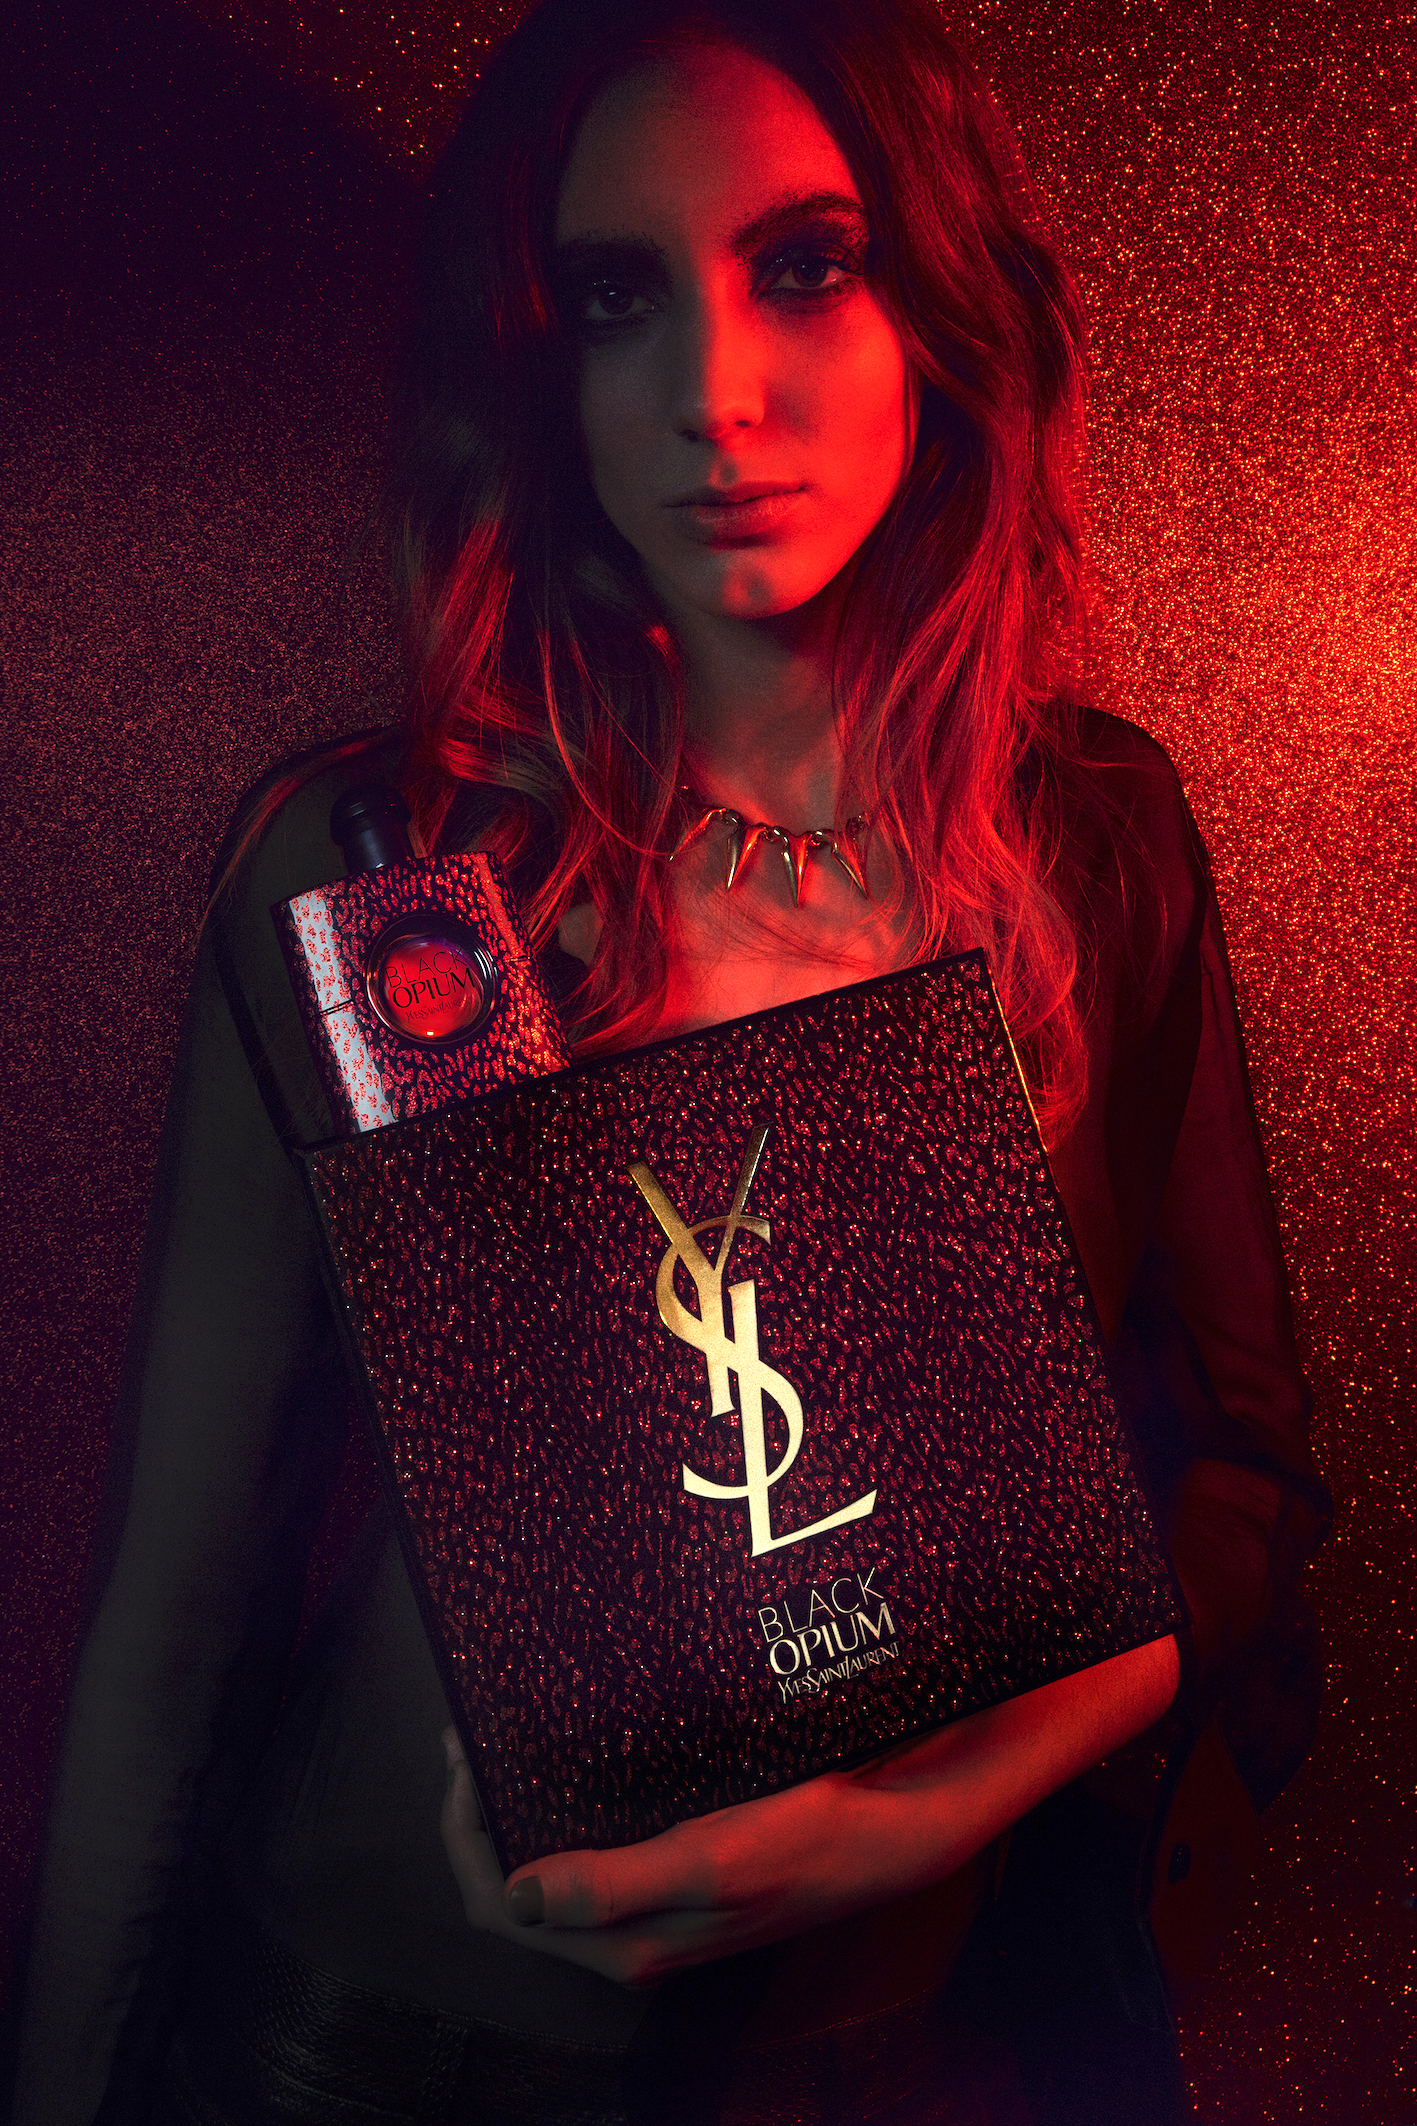 ysl-black-opium-edp-baby-cat-limited-edition_mood-pic-(4)